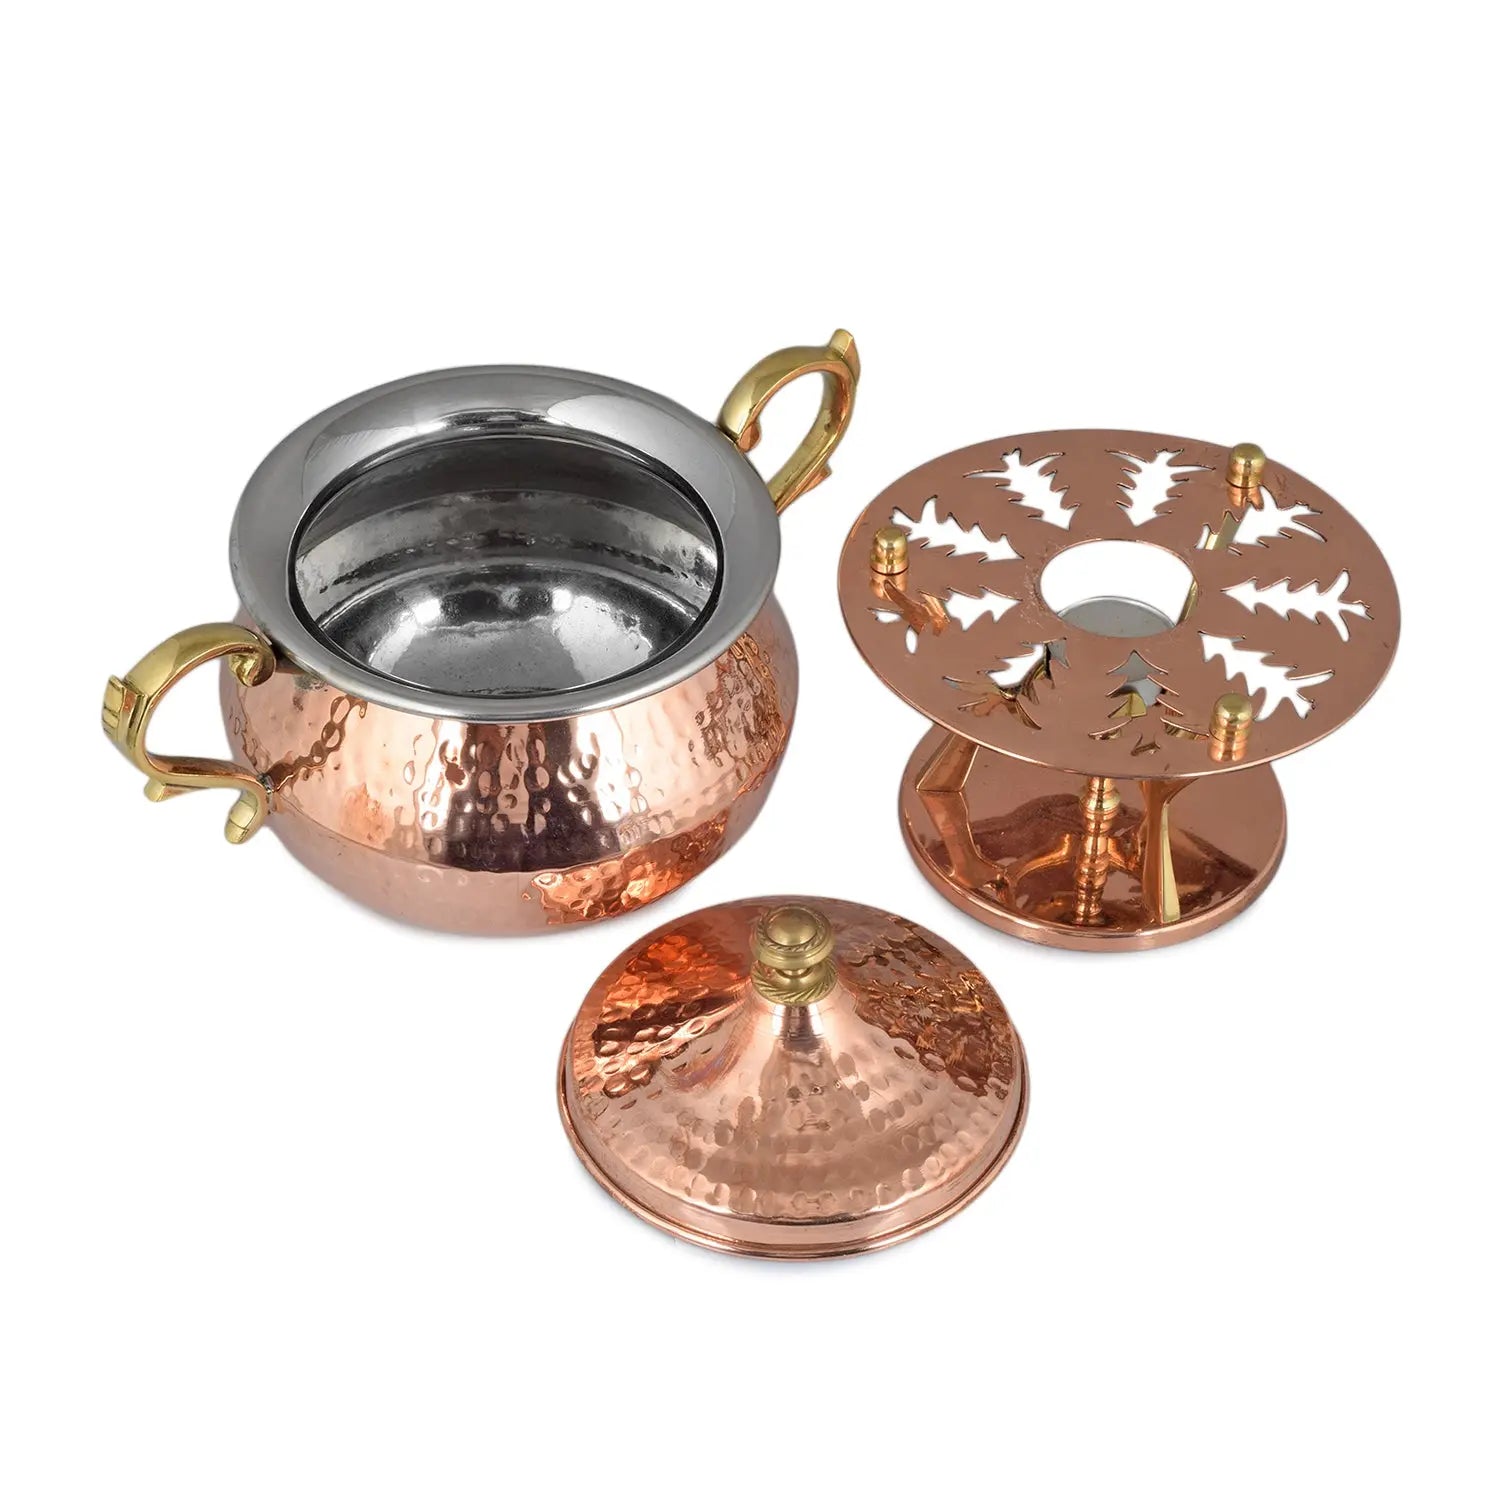 Crockery Wala And Company Copper Steel Hammered Punjabi Handi With Copper Warmer Stand & Copper Lid For Serving Serveware 1200 ML - CROCKERY WALA AND COMPANY 